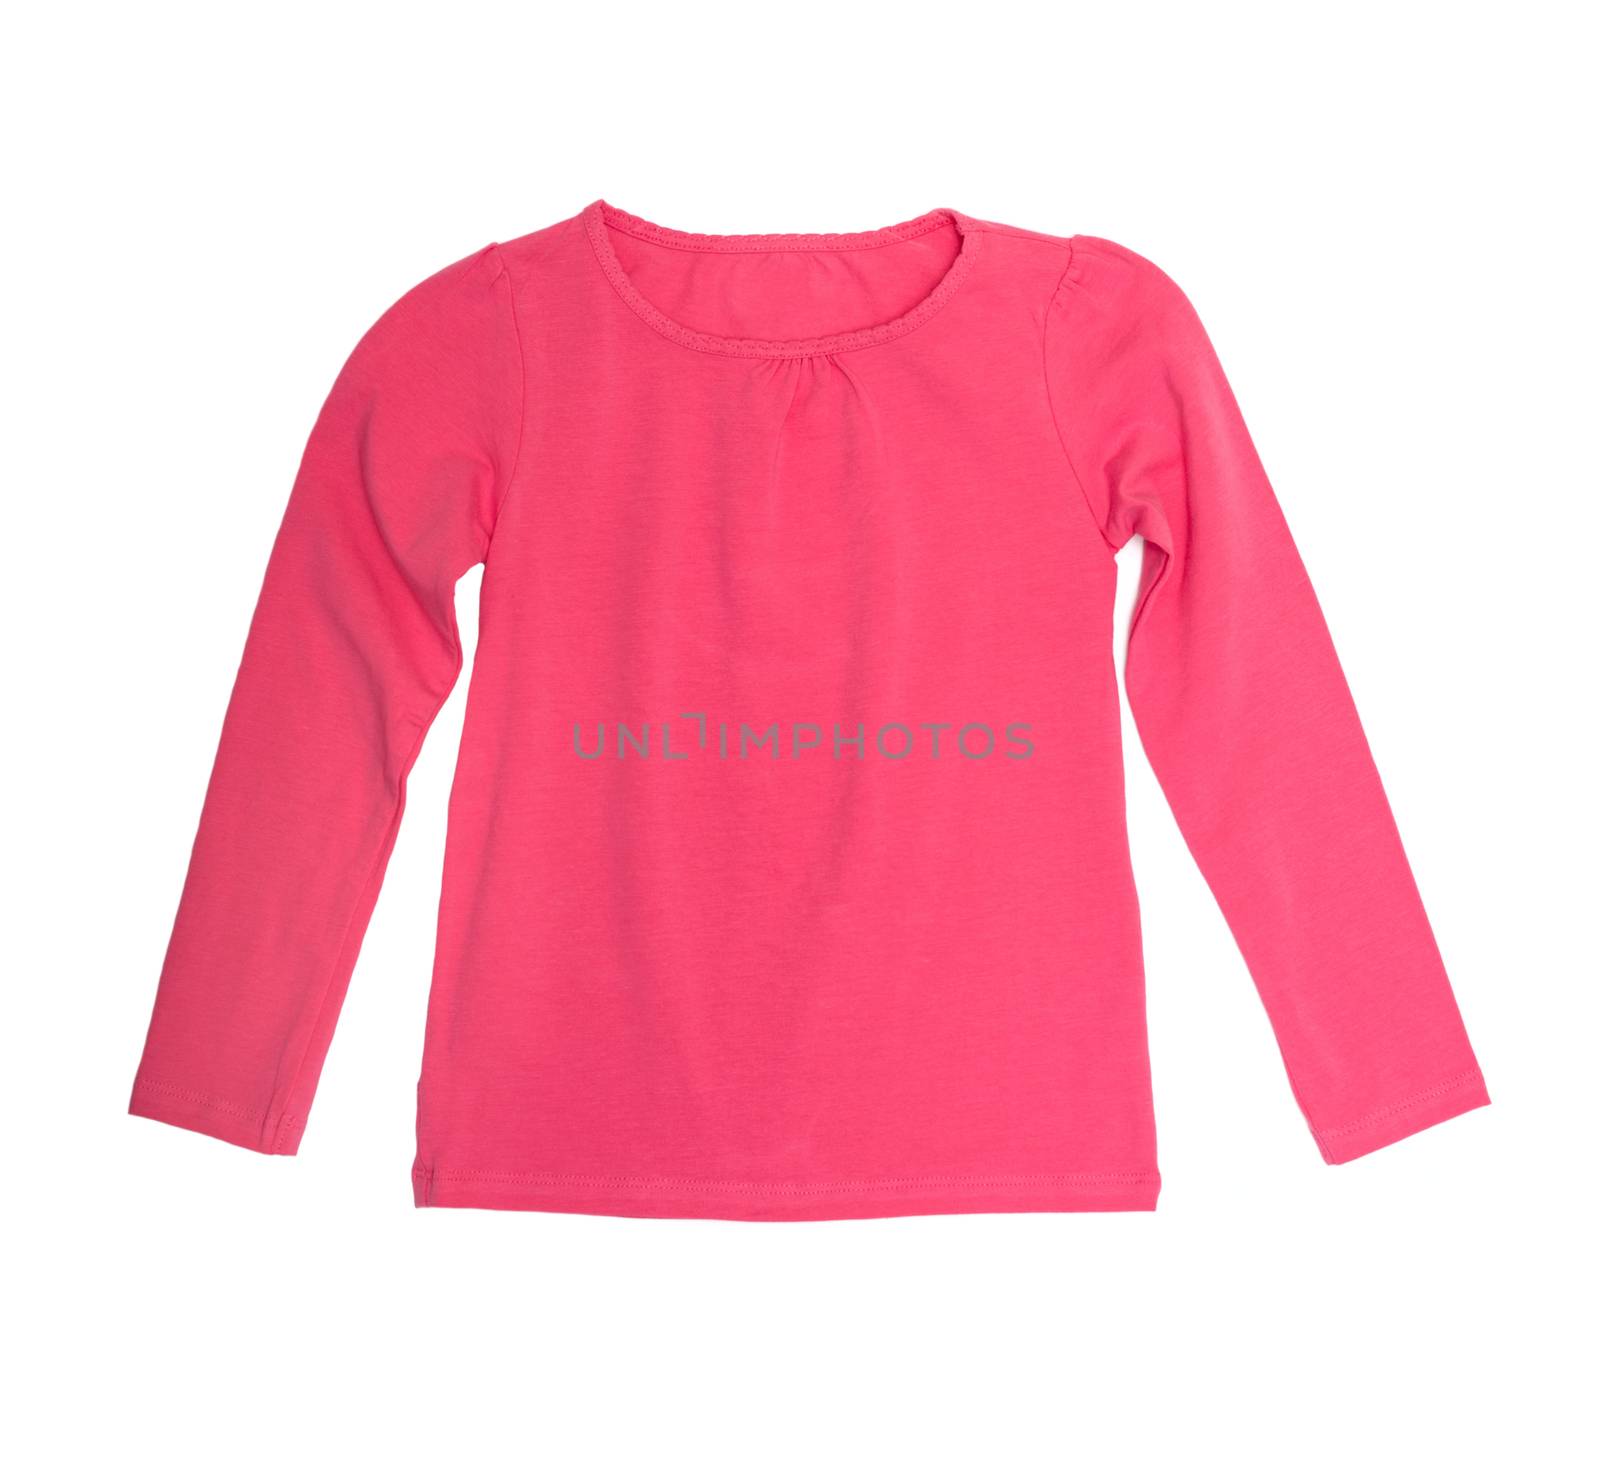 Children's wear - pink long sleeve isolated on the white backgro by DNKSTUDIO